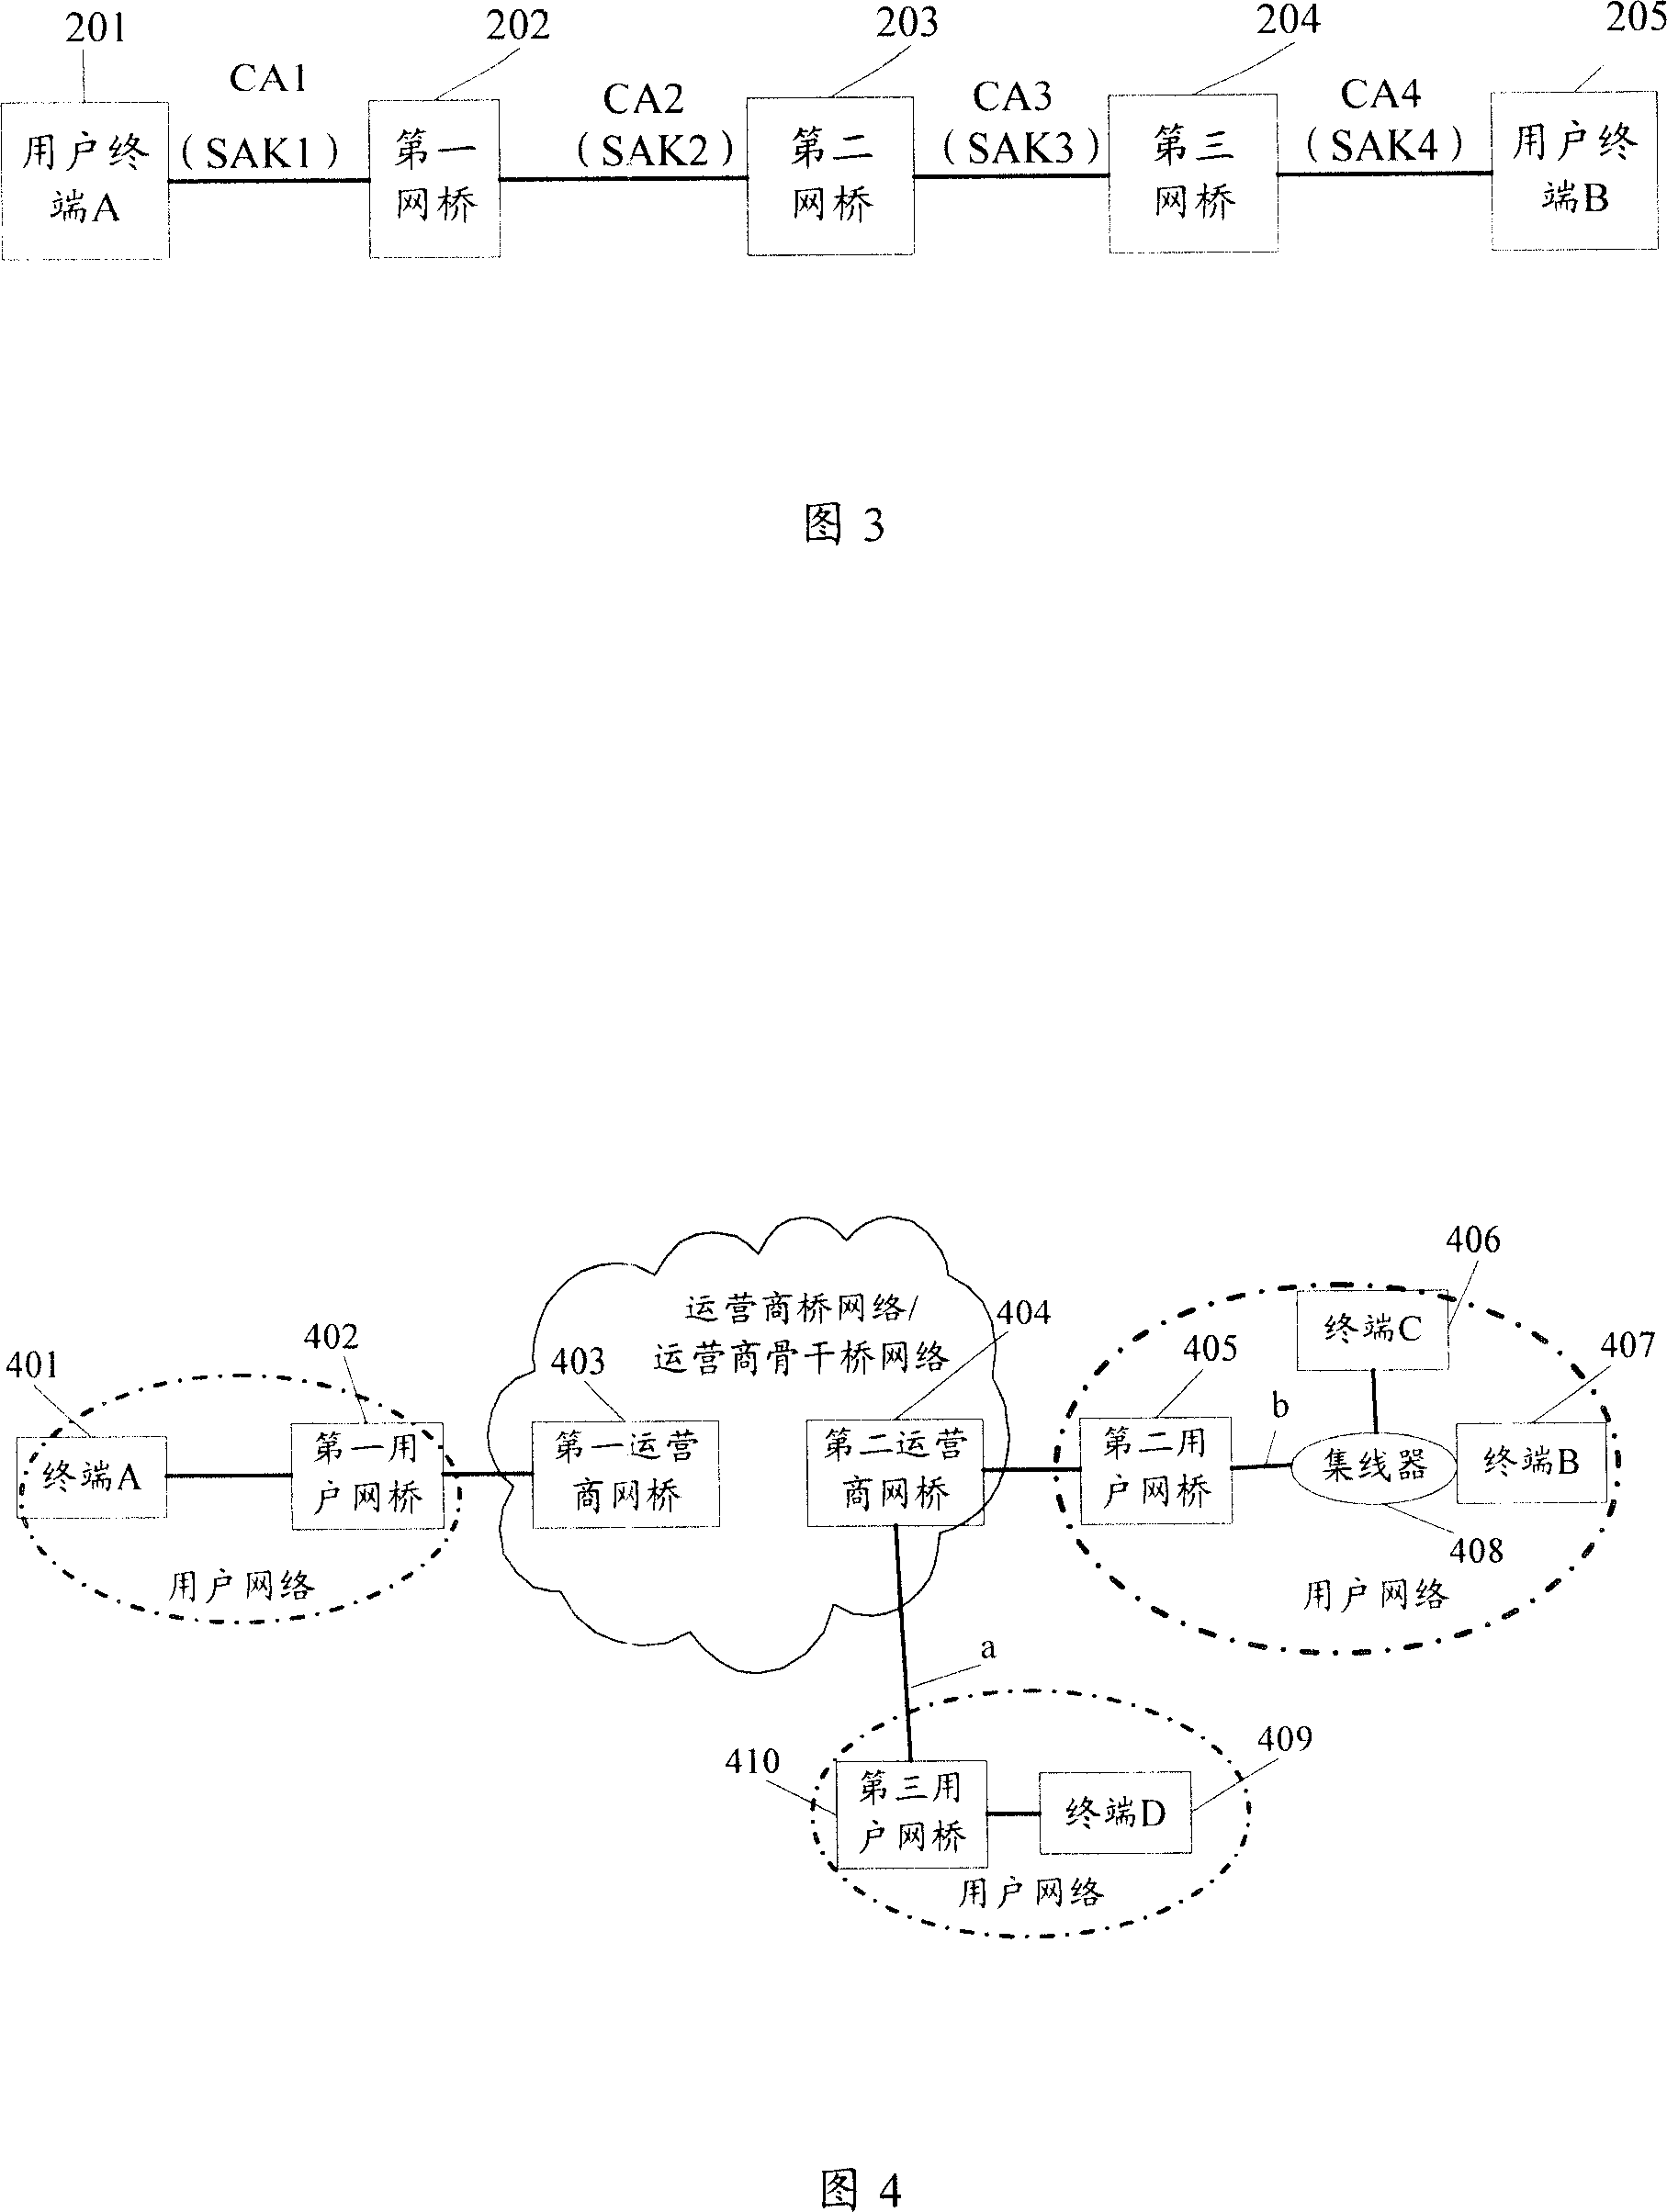 MAC secure network communication method and network device